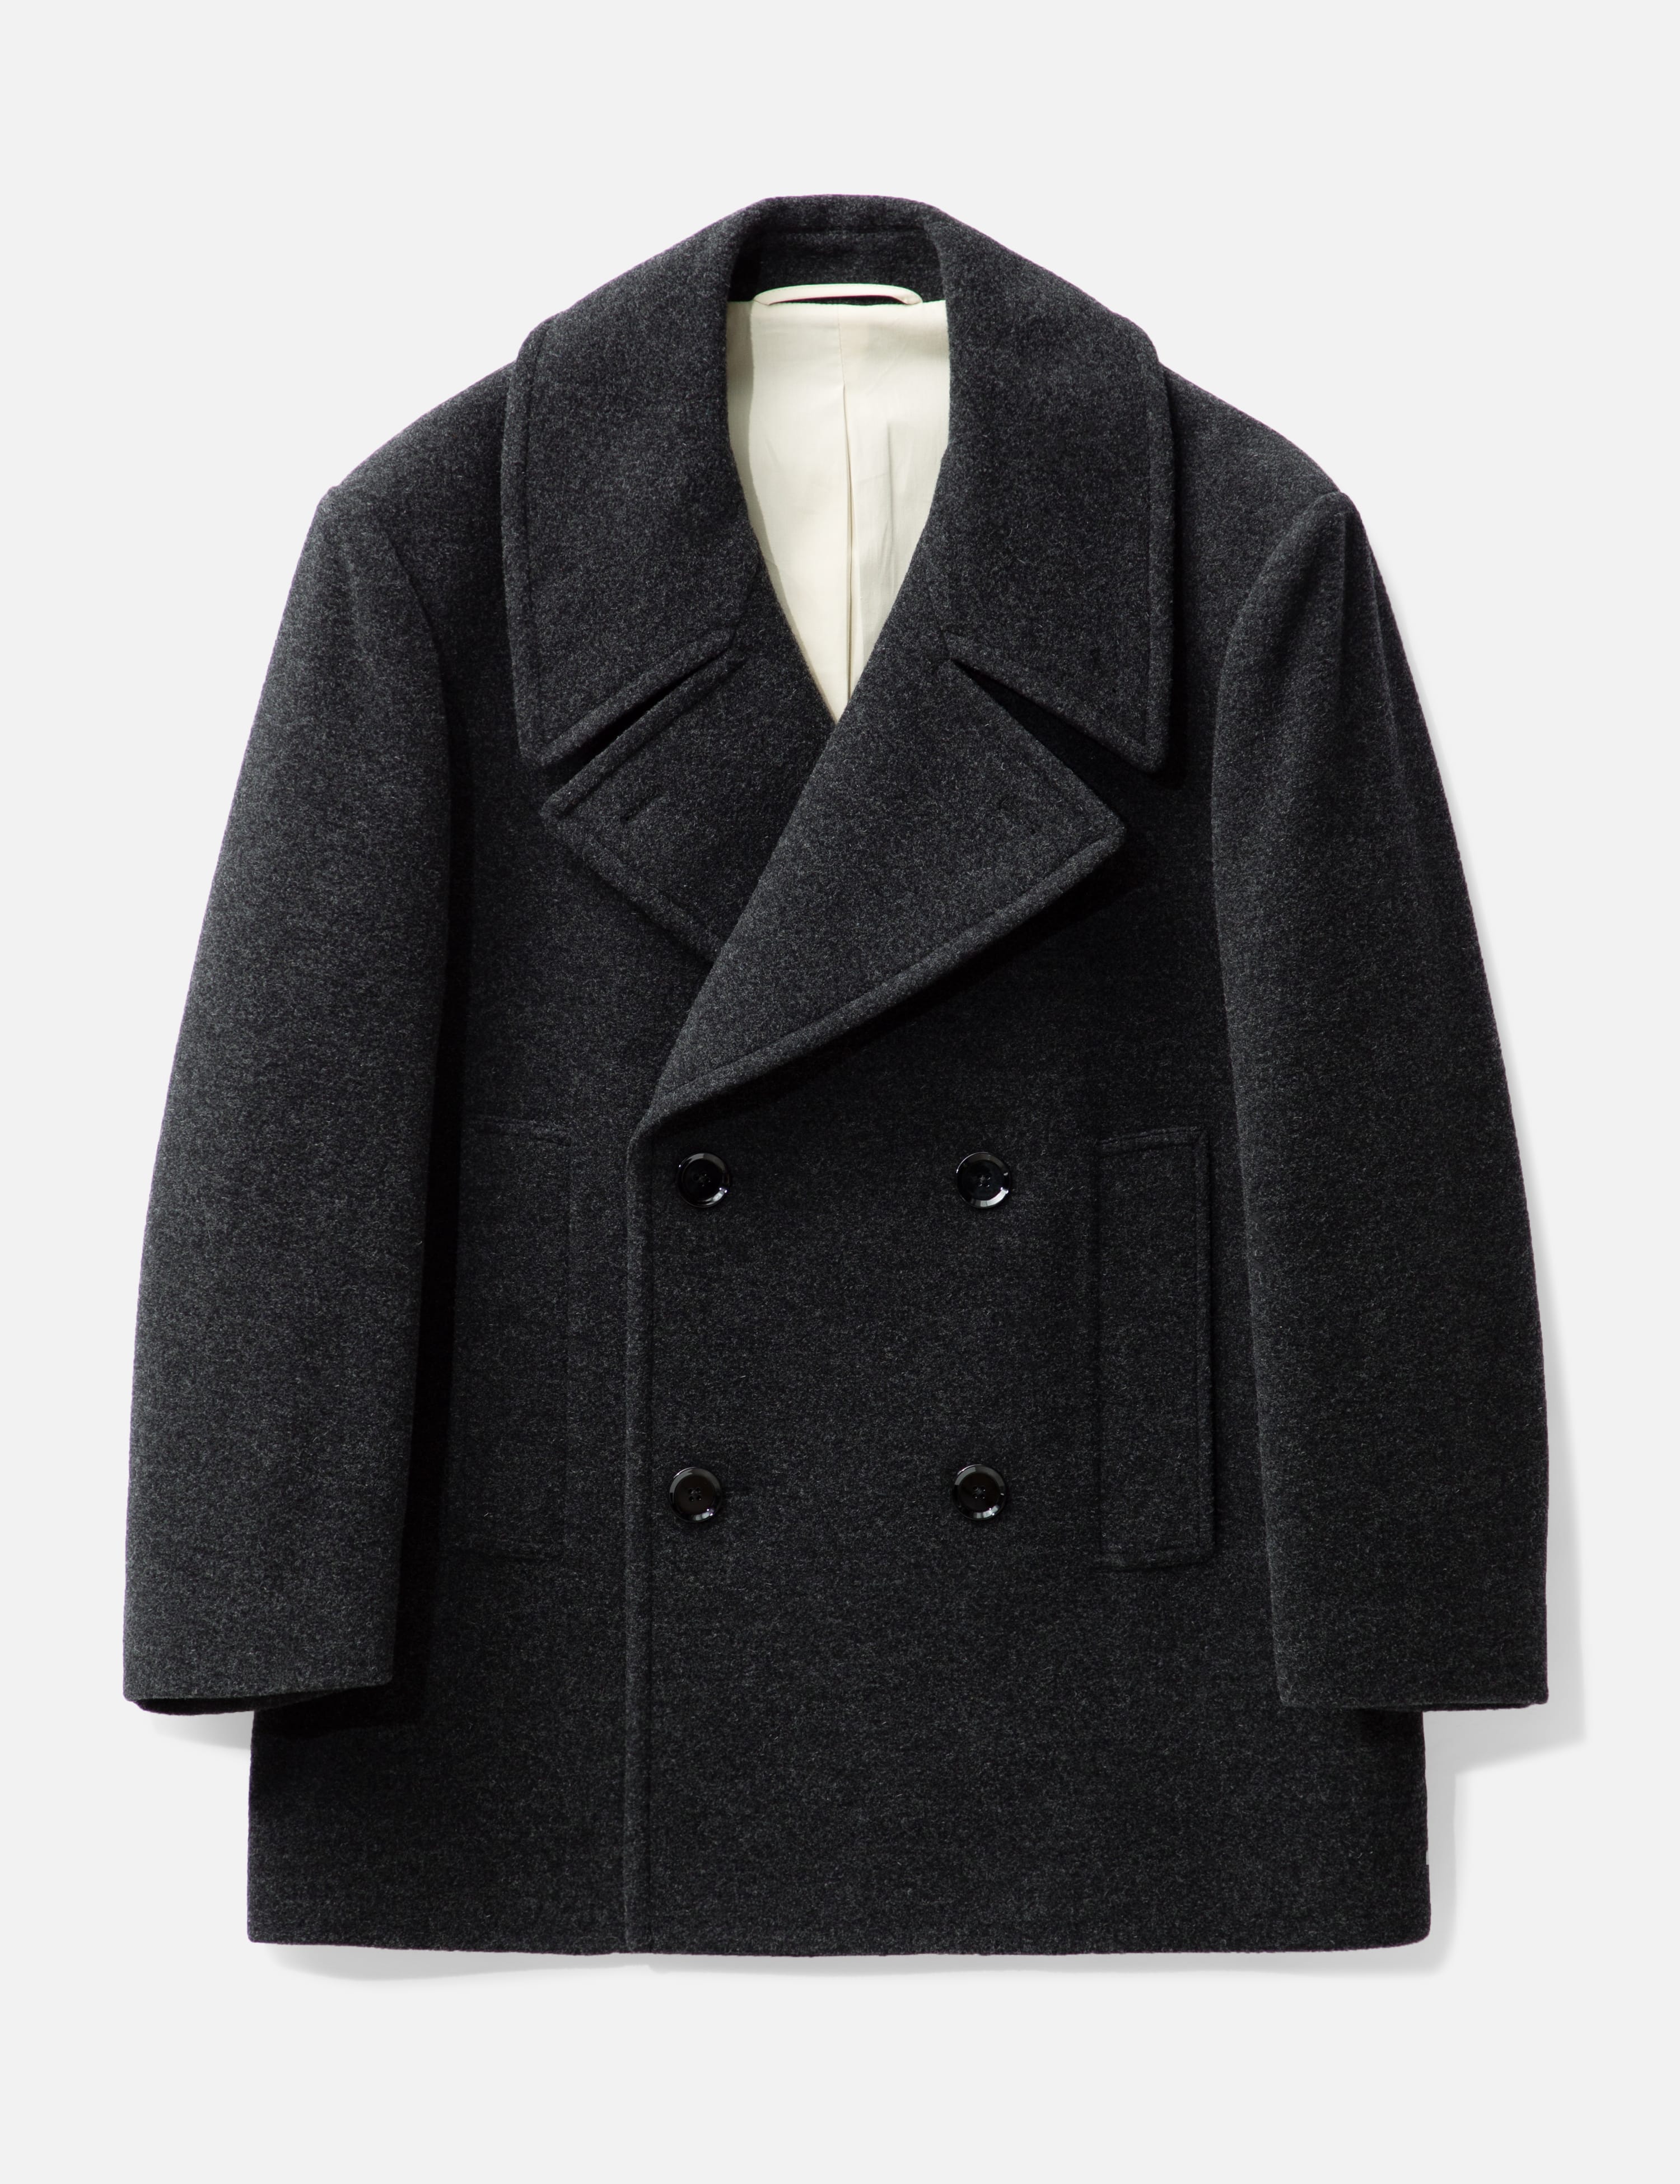 Lemaire - Maxi Pea Coat | HBX - Globally Curated Fashion and